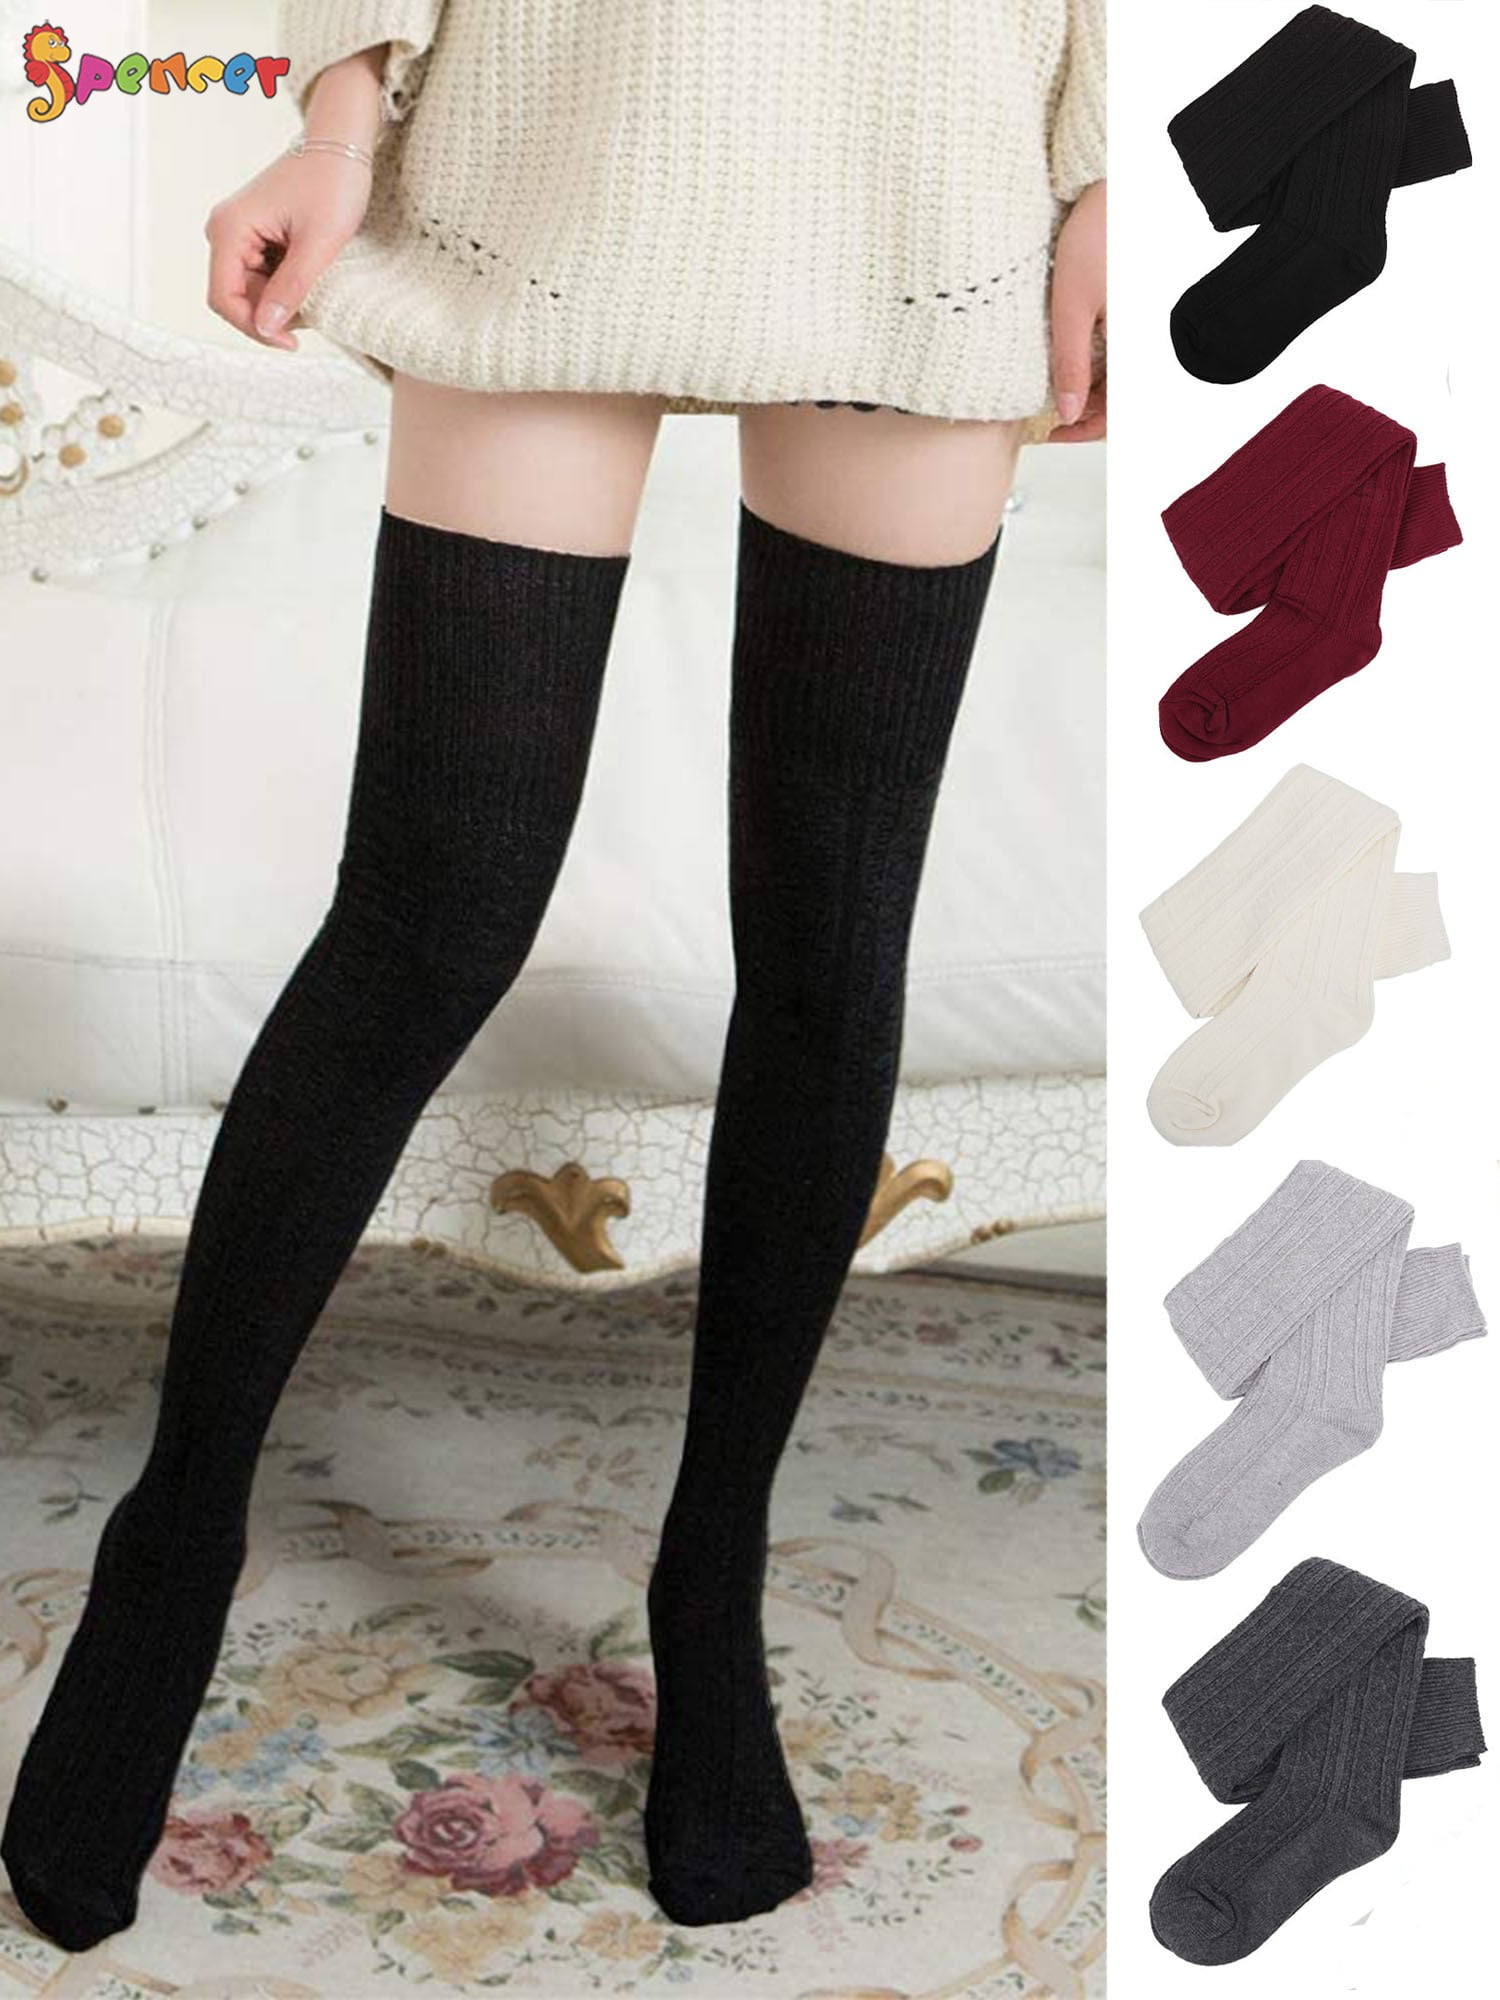 Extra Long Socks Thigh High Cotton Socks Extra Long Boot Stockings for Women 